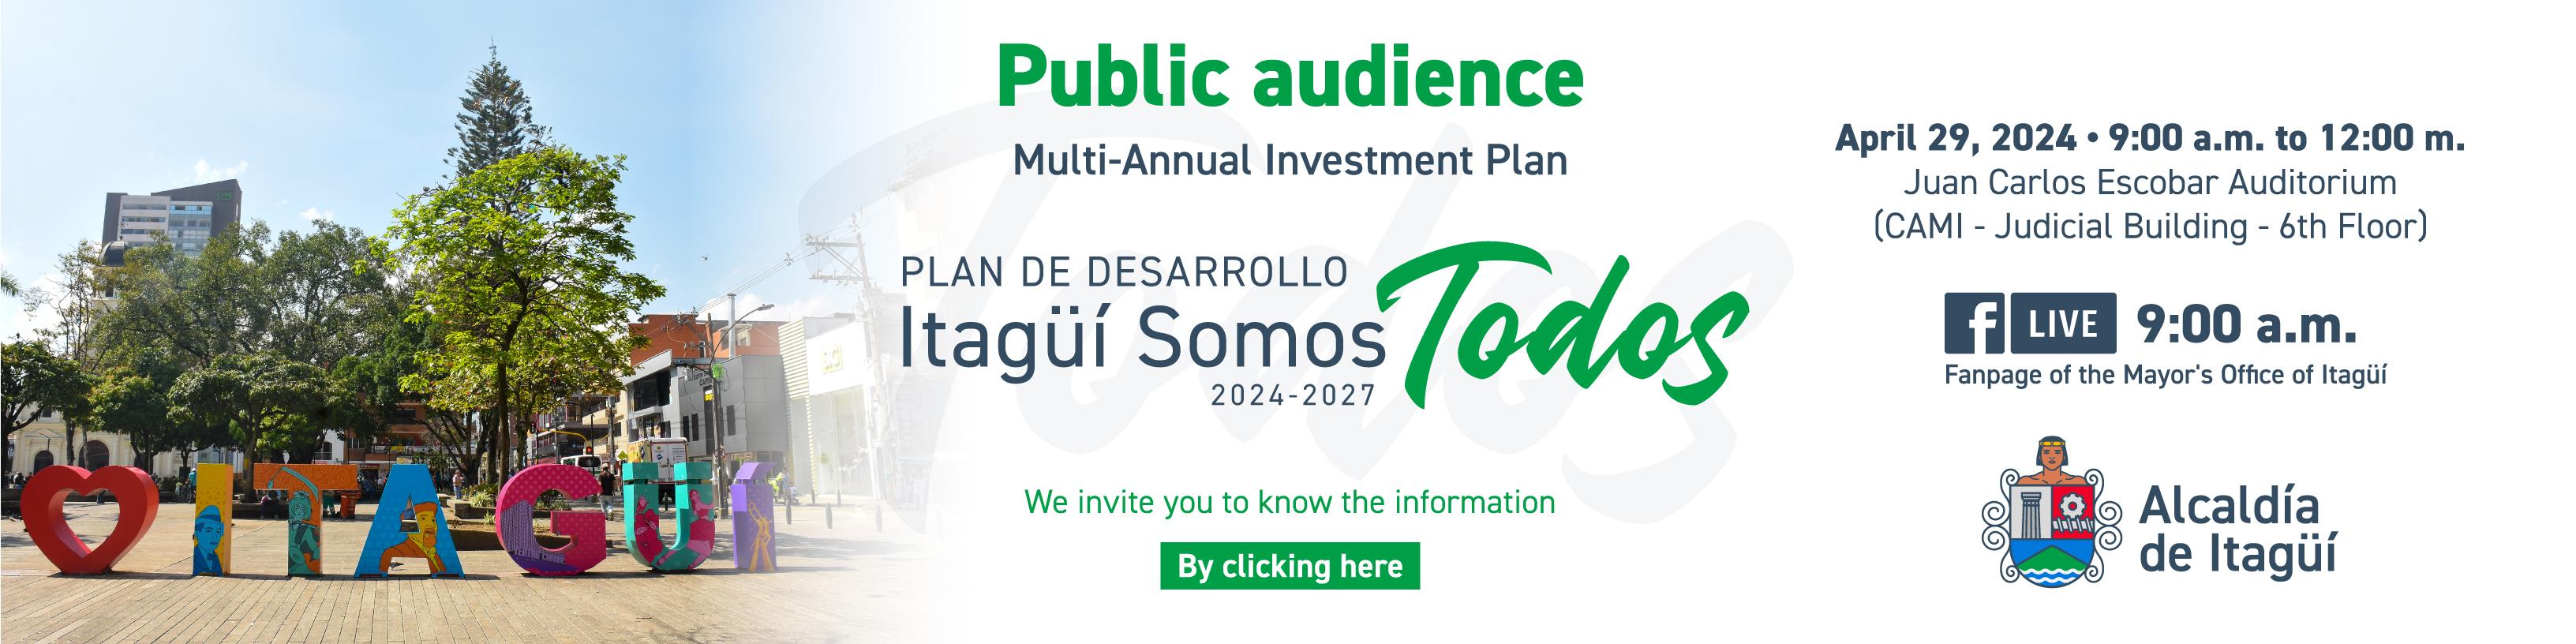 Multiannual Investment Plan 2024 - 2027